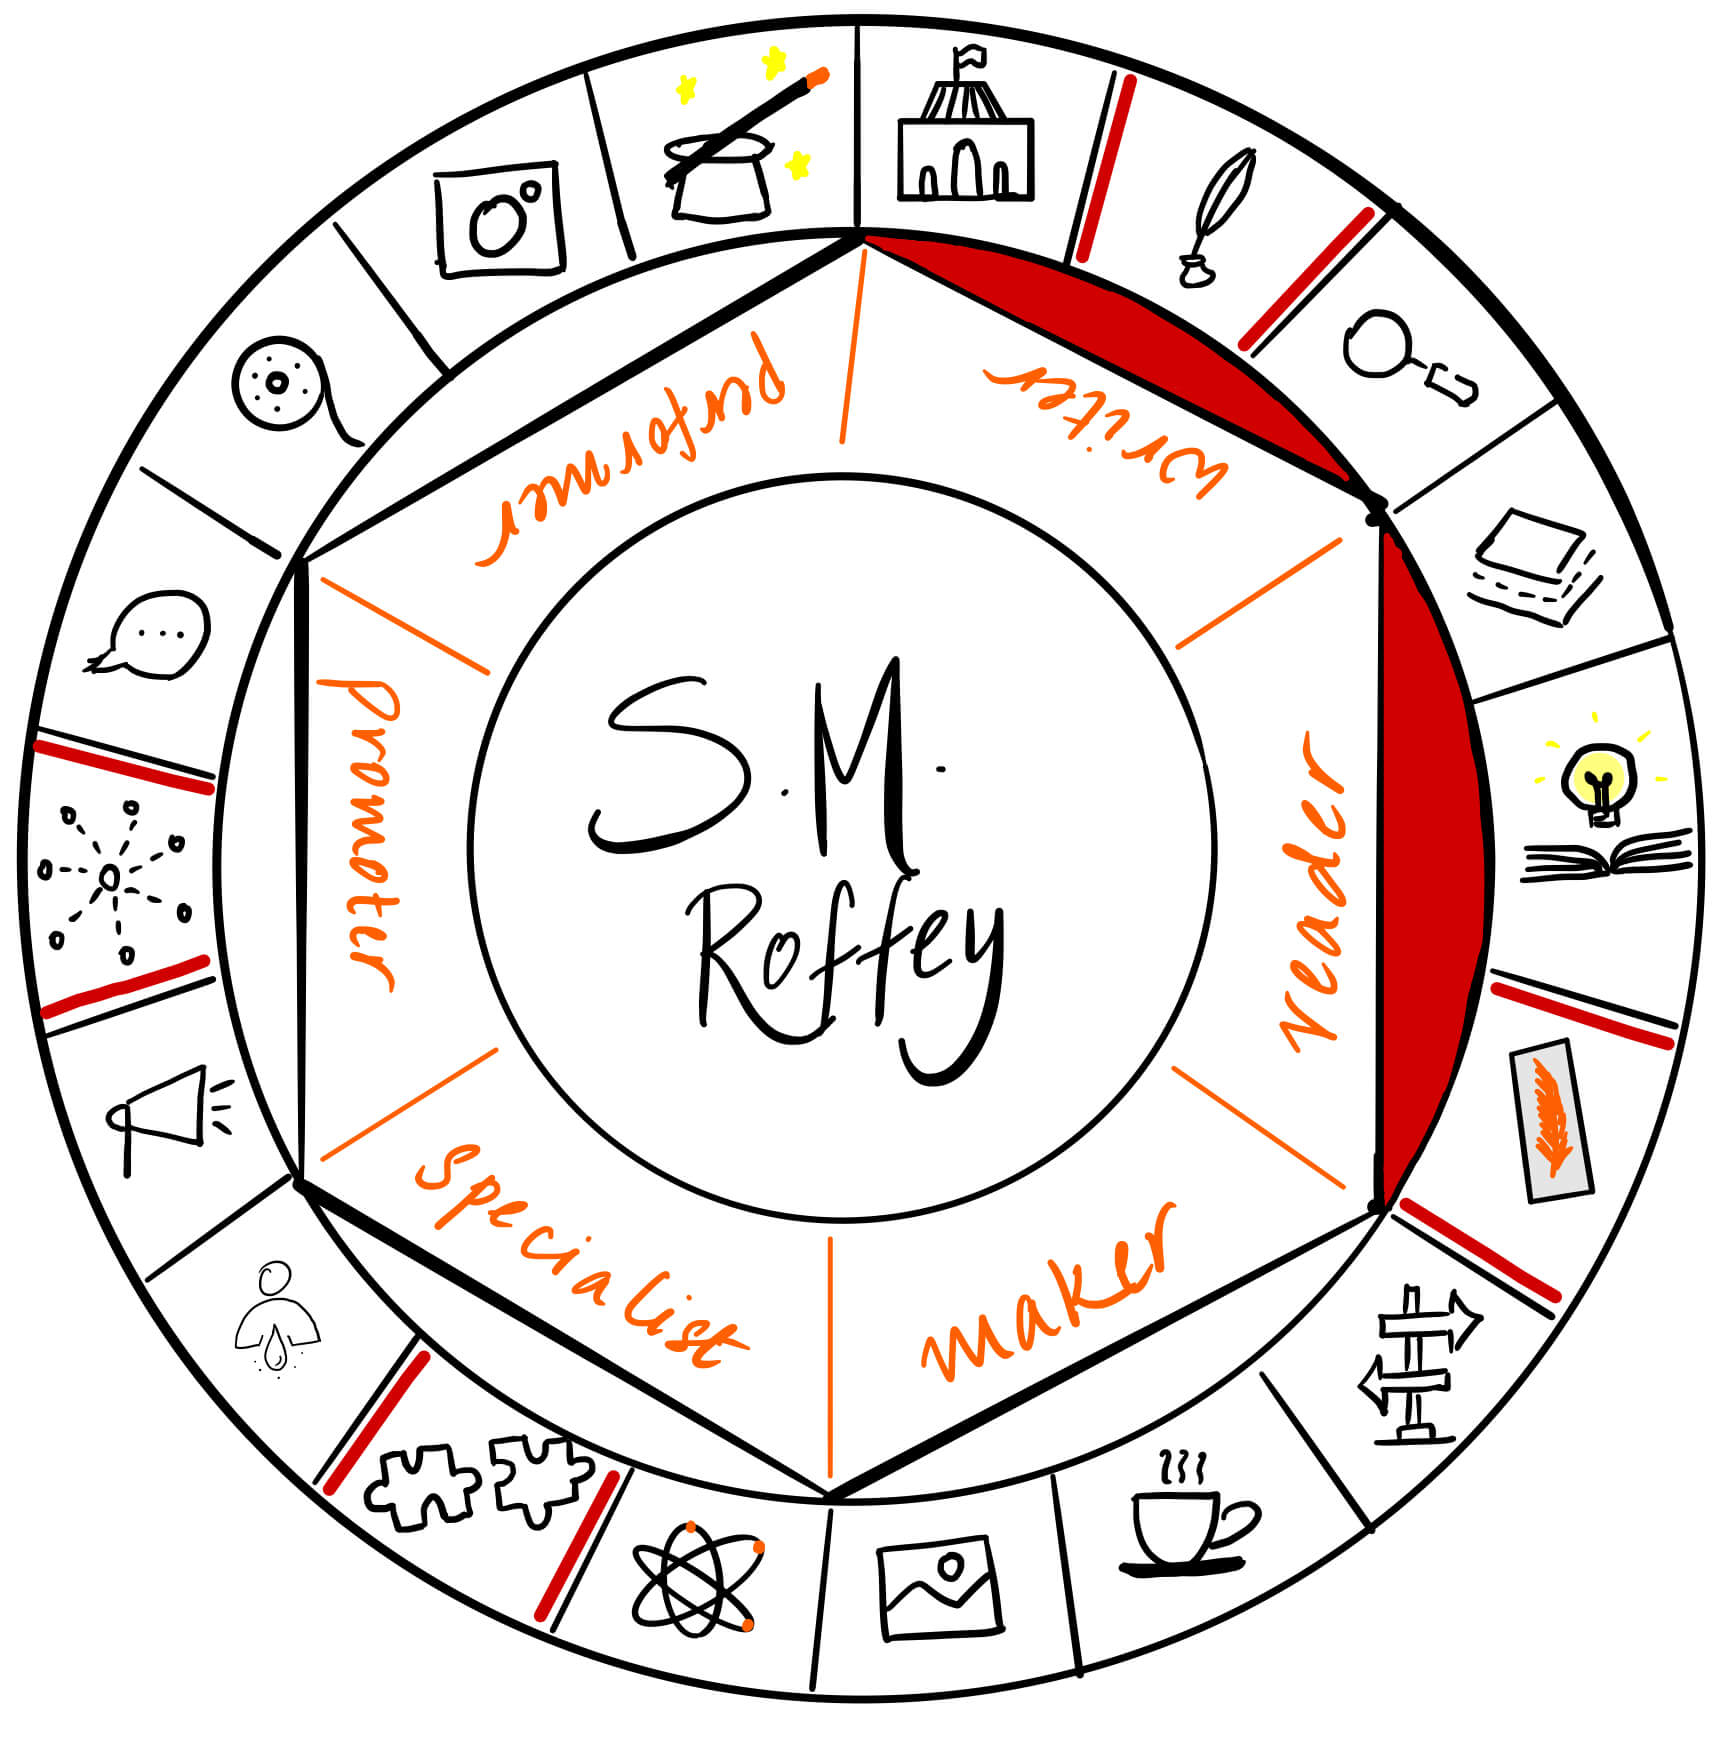 S. M. Roffey is a reader and writer. It's a pleasure to have her over on The Creator's Roulette to talk about #TeamOptimism and its influence on the writing community.